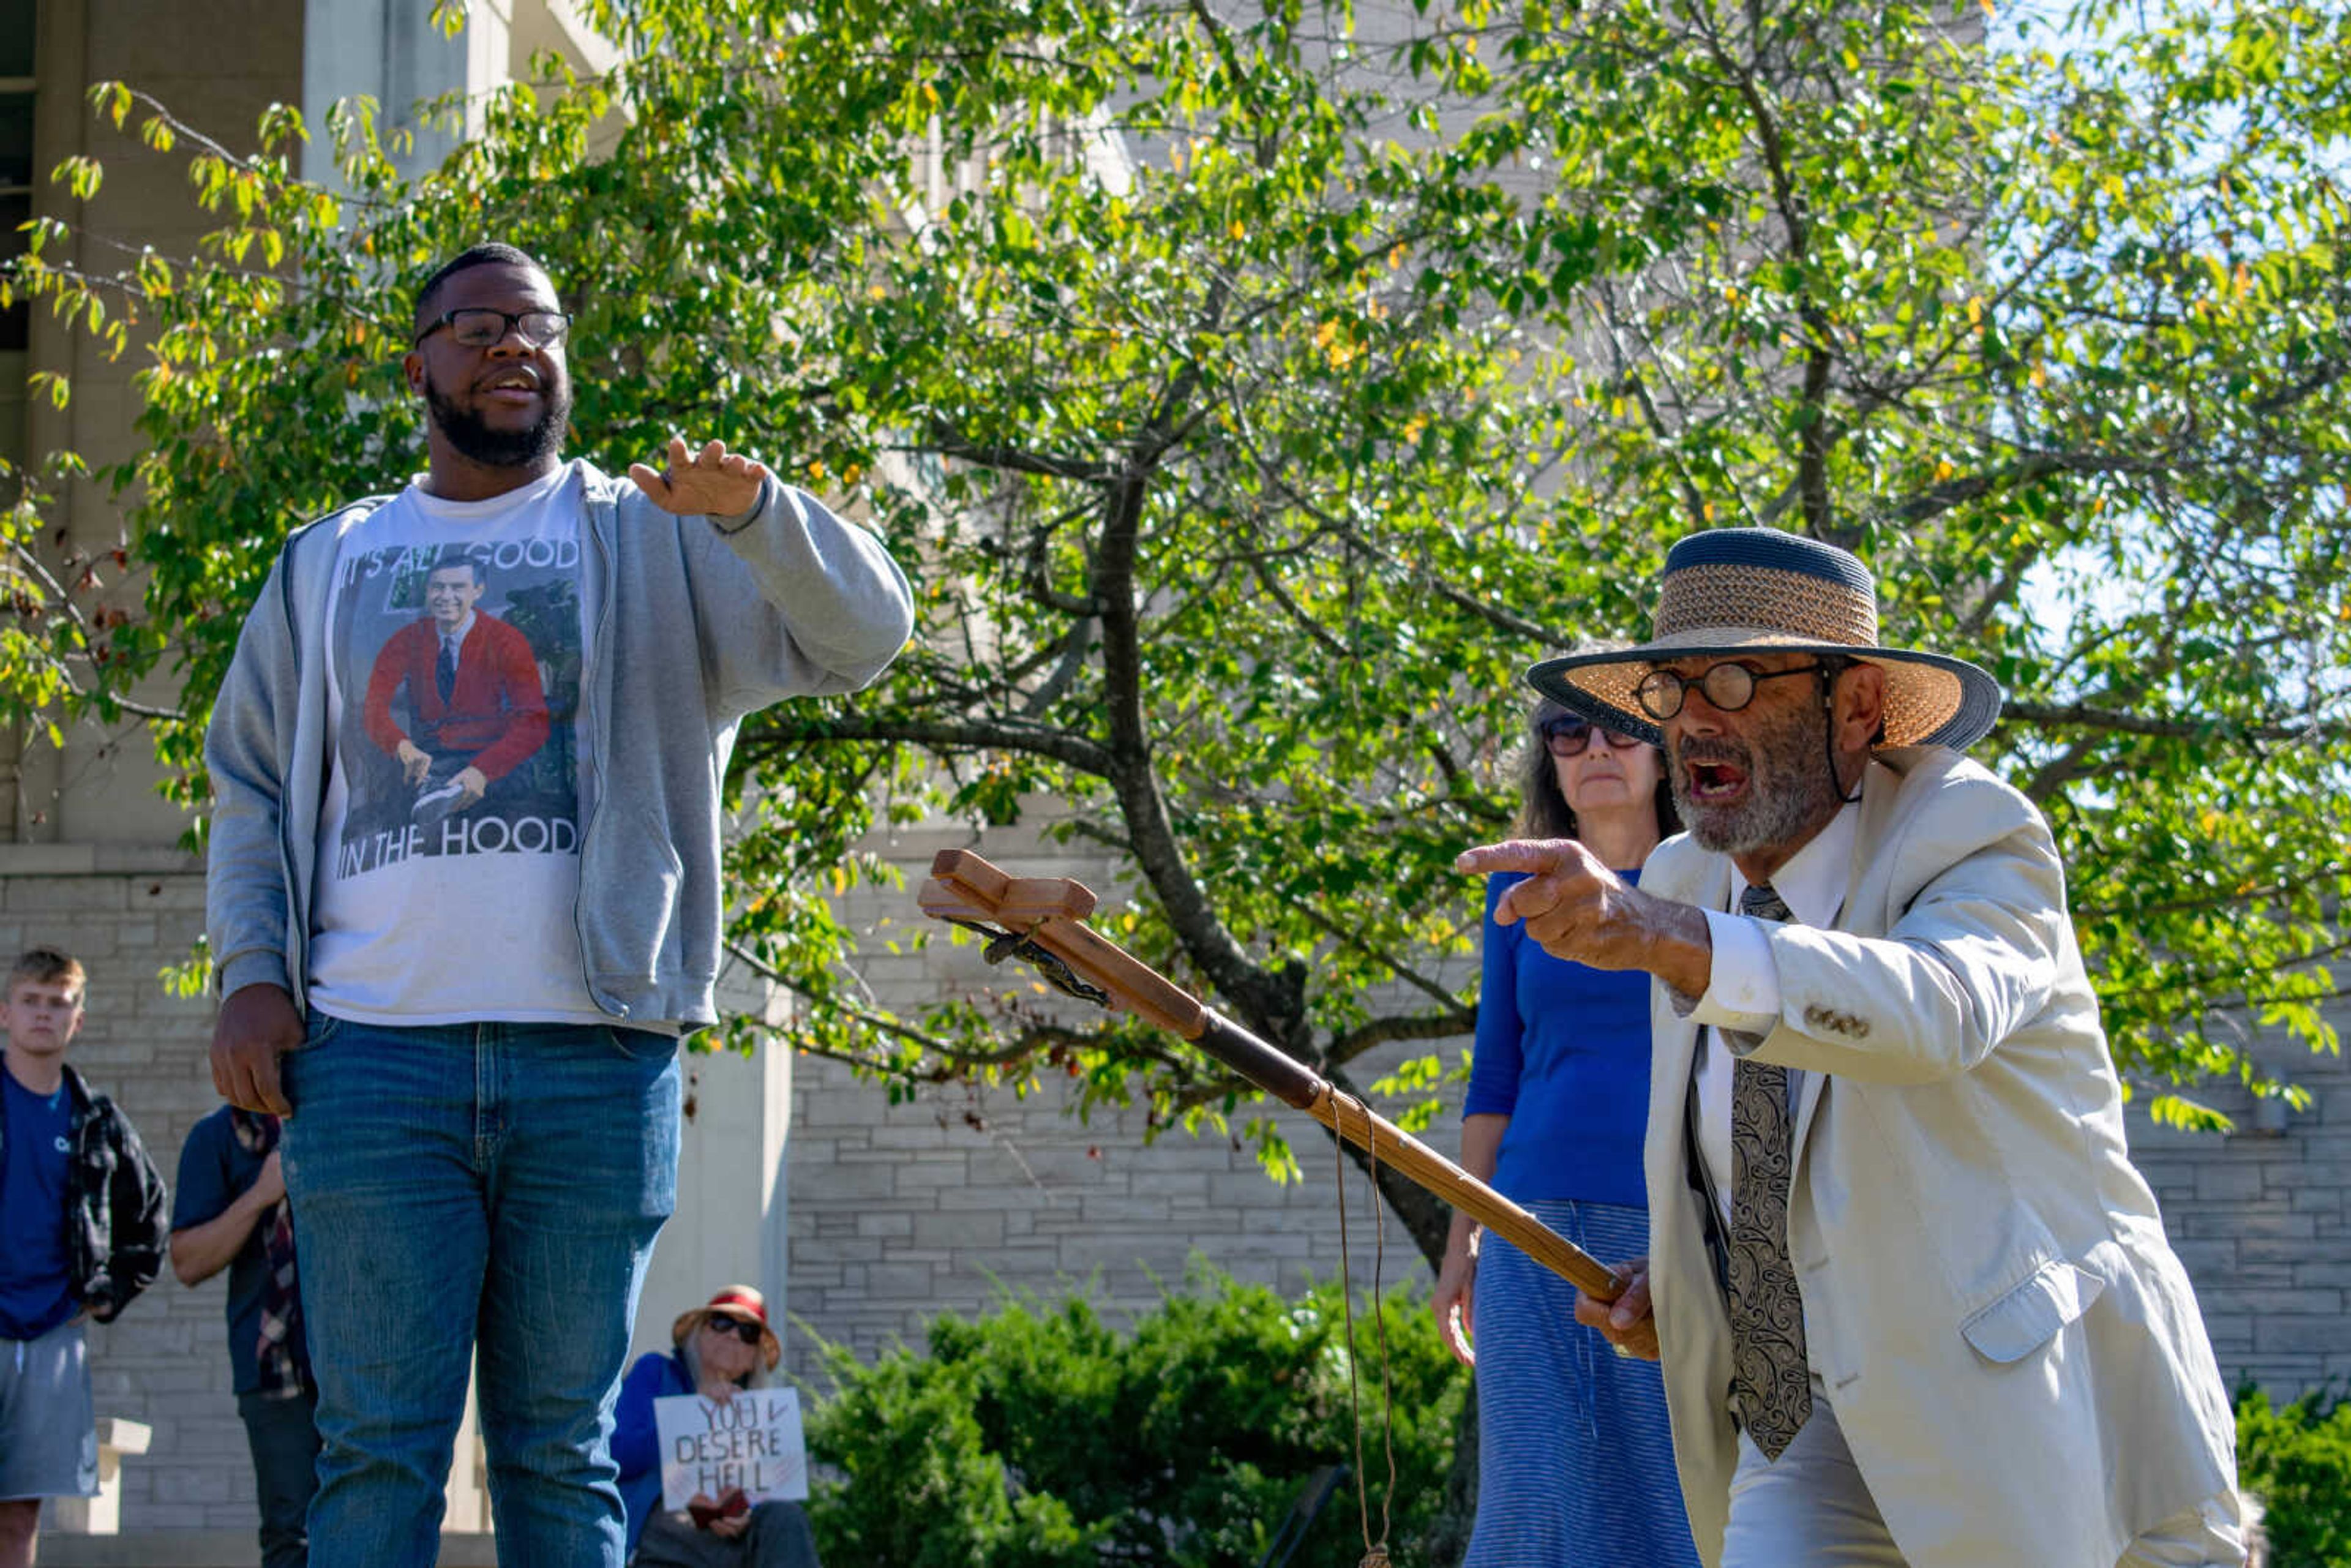 Southeast student Noah Coates (left) attempts to reason with Brother Jed (right) while Jed points fingers into the crowd in front of Kent Library on Wednesday, Oct. 9.